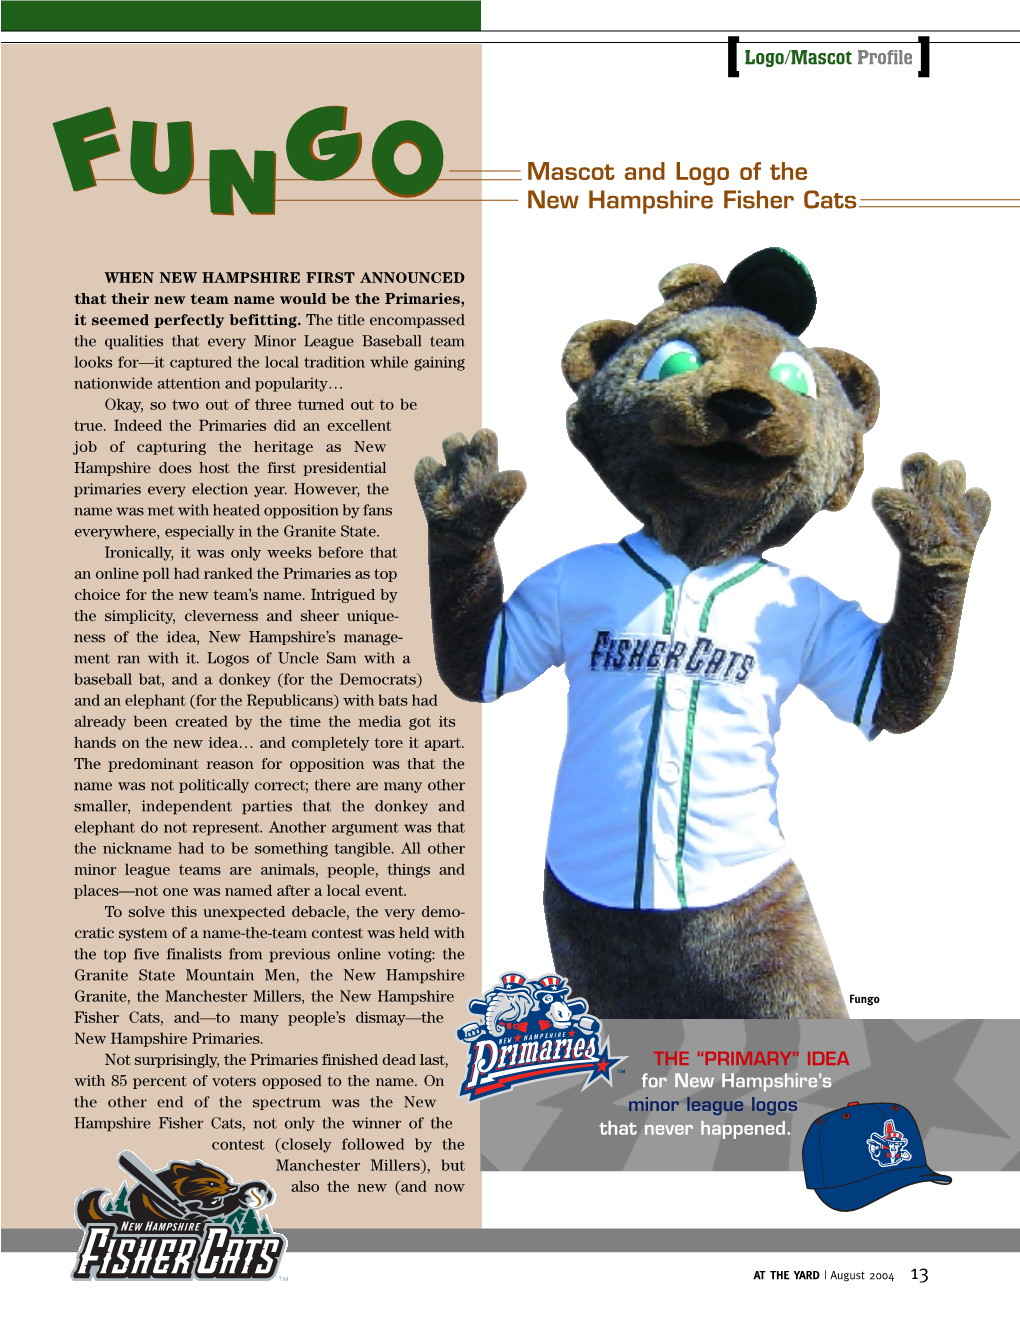 Mascot and Logo of the New Hampshire Fisher Cats